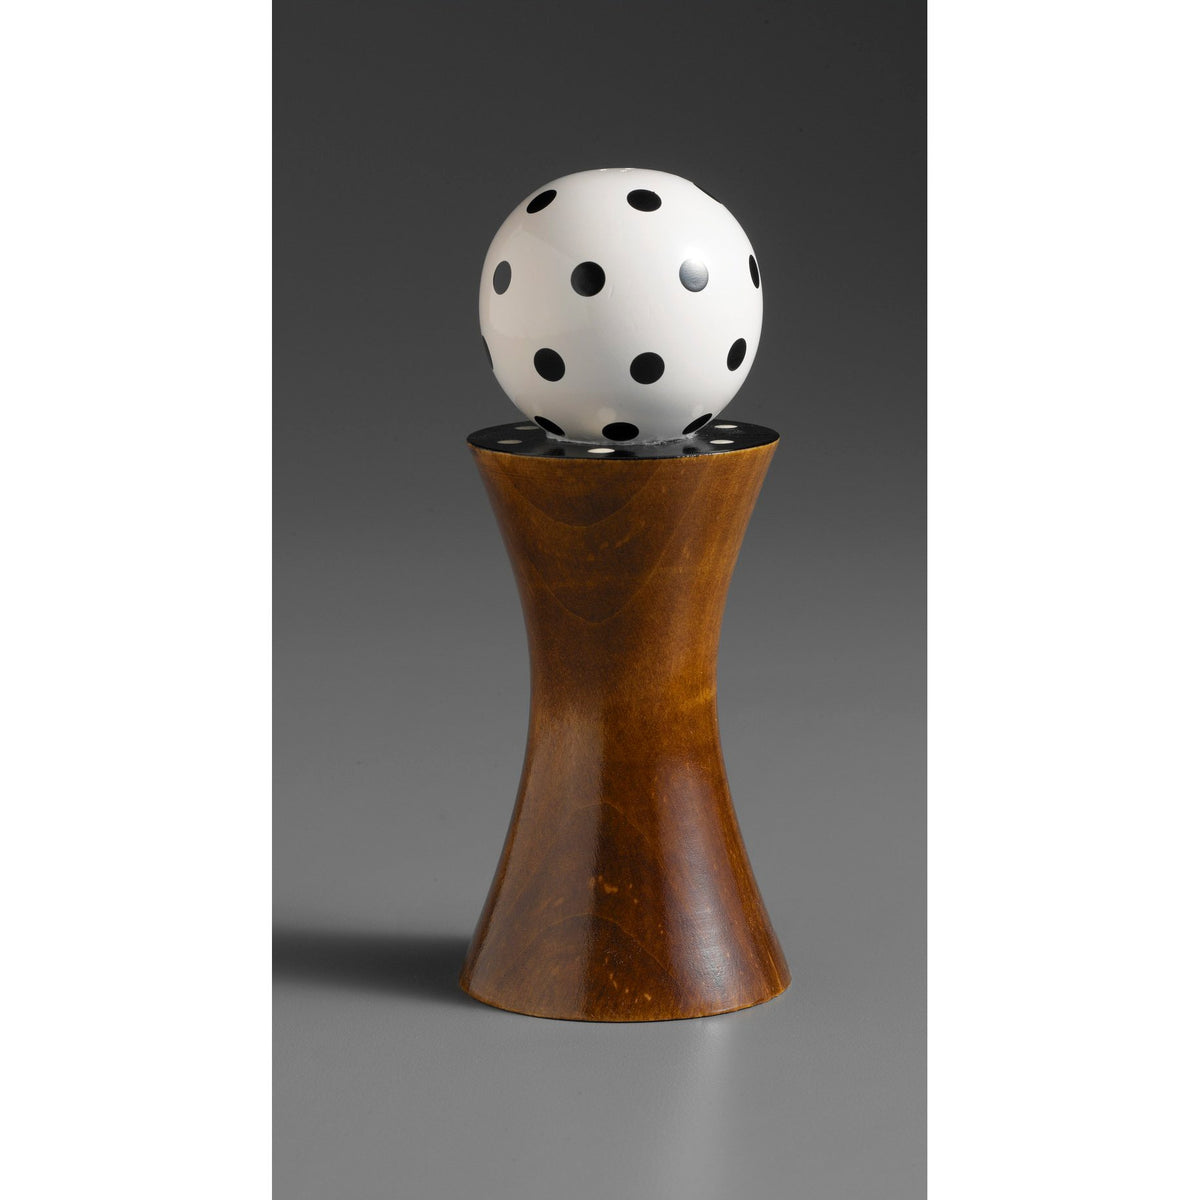 http://www.sweetheartgallery.com/cdn/shop/products/Wood-Salt-or-Pepper-Mill-Grinder-Alpha-in-Brown-Black-and-White-by-Robert-Wilhelm-of-Raw-Design-Artistic-Artisan-Designer-Handmade-Wood-Salt-And-Pepper-Mills-Grinders-and-Shakers_1200x1200.jpg?v=1590418549